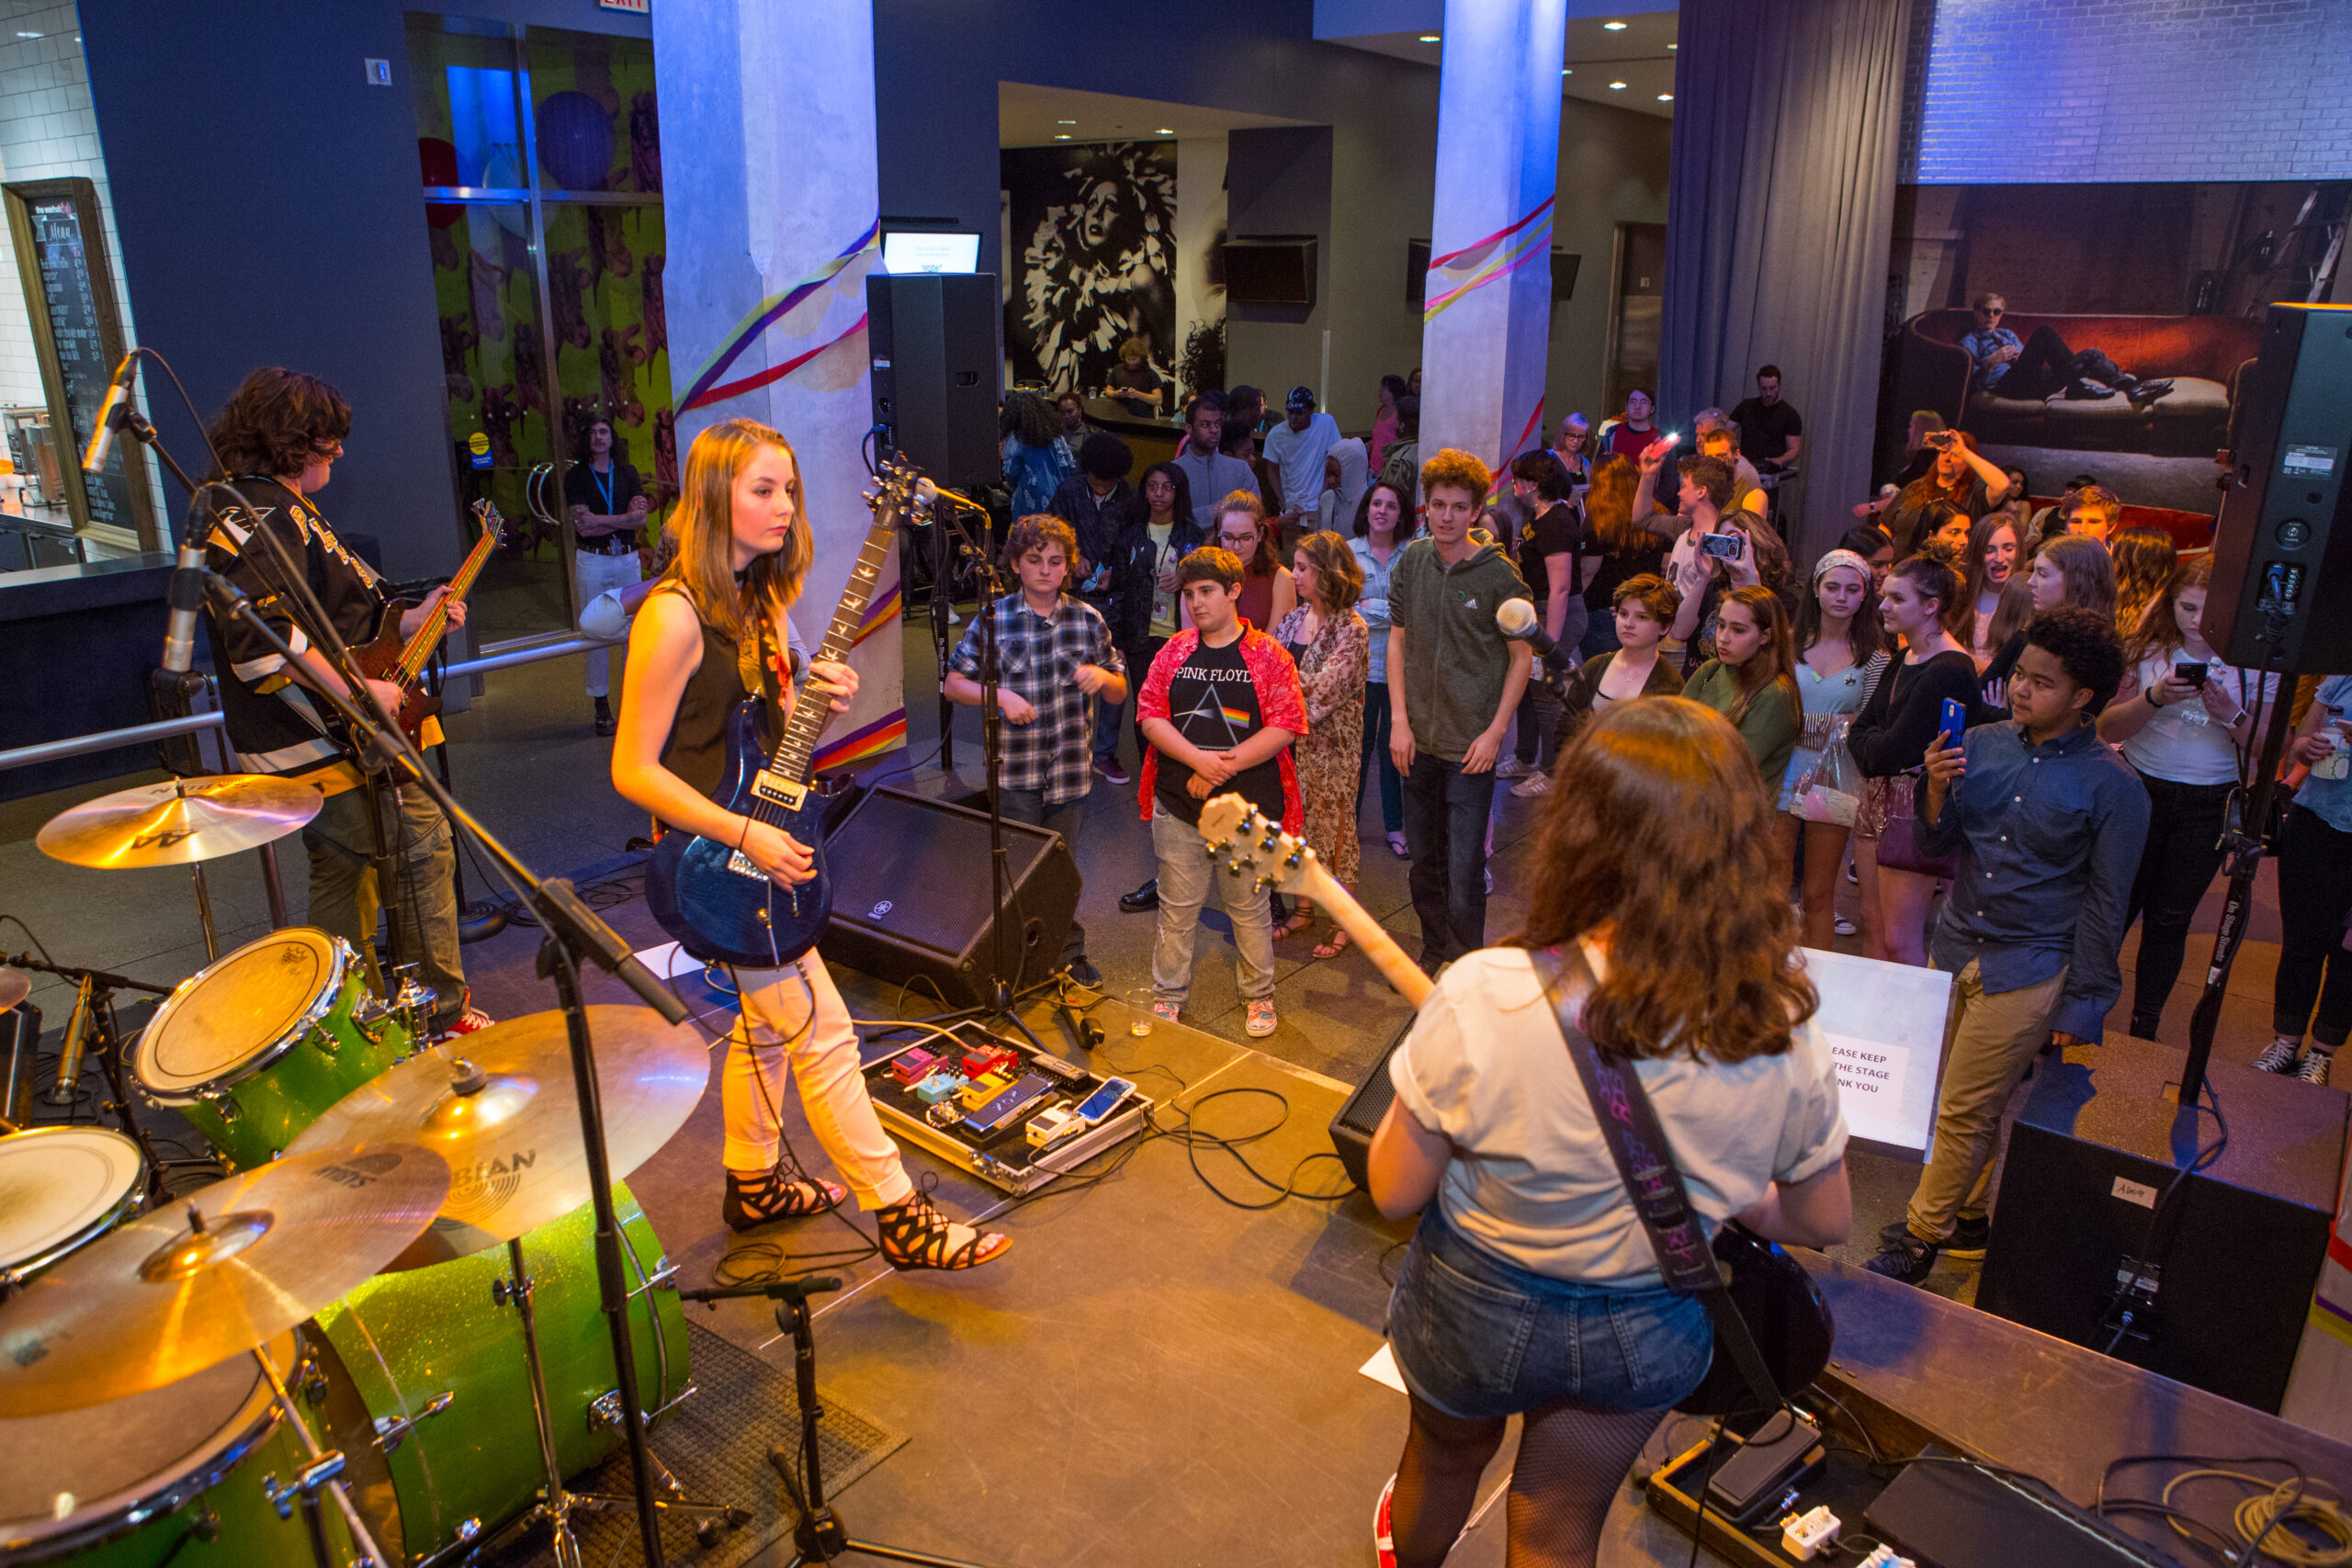 A teen band is playing on stage in front of an audience of mostly teens in The Warhol entrance space.